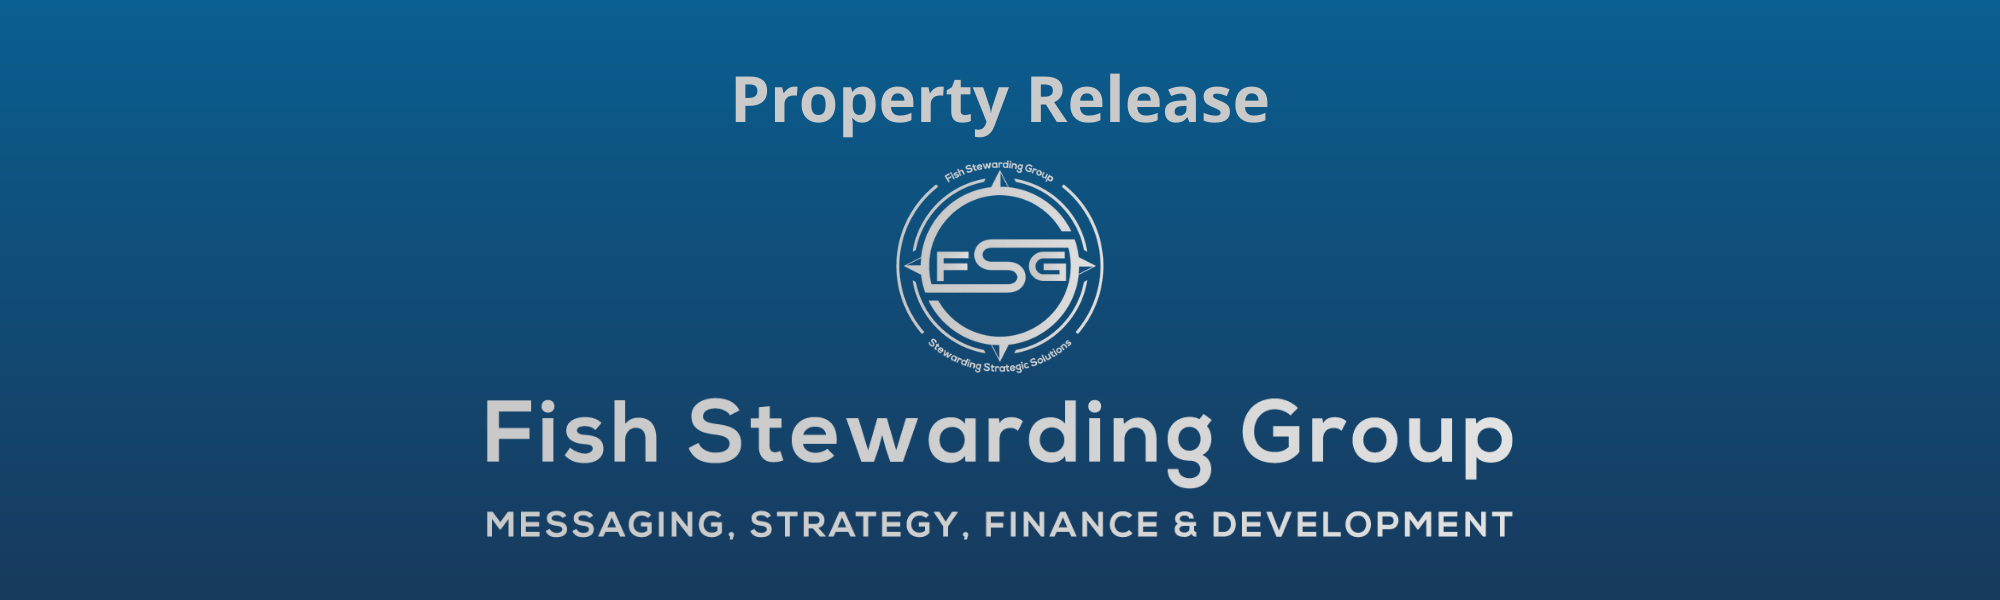 A thin rectangular Footer graphic for the Property Release page. The background is a blue gradient color that goes from a dark blue on the bottom to a lighter blue on top. The text in gray on top reads Property Release. The text in gray on the bottom center reads: Fish Stewarding Group and beneath that, the text reads Messaging, Strategy, Finance and Development. In the center above the text is the FSG logo in gray. The logo has the letters FSG in the middle with a circle with four pointed arrows facing north, south, east and west with the S connected to that circle. Four rounded lines make the next circle of the circle and the last layer is a thin circle with the text on the Bottom that reads Stewarding Strategist Solutions and on top, the text reads Fish Stewarding Group.